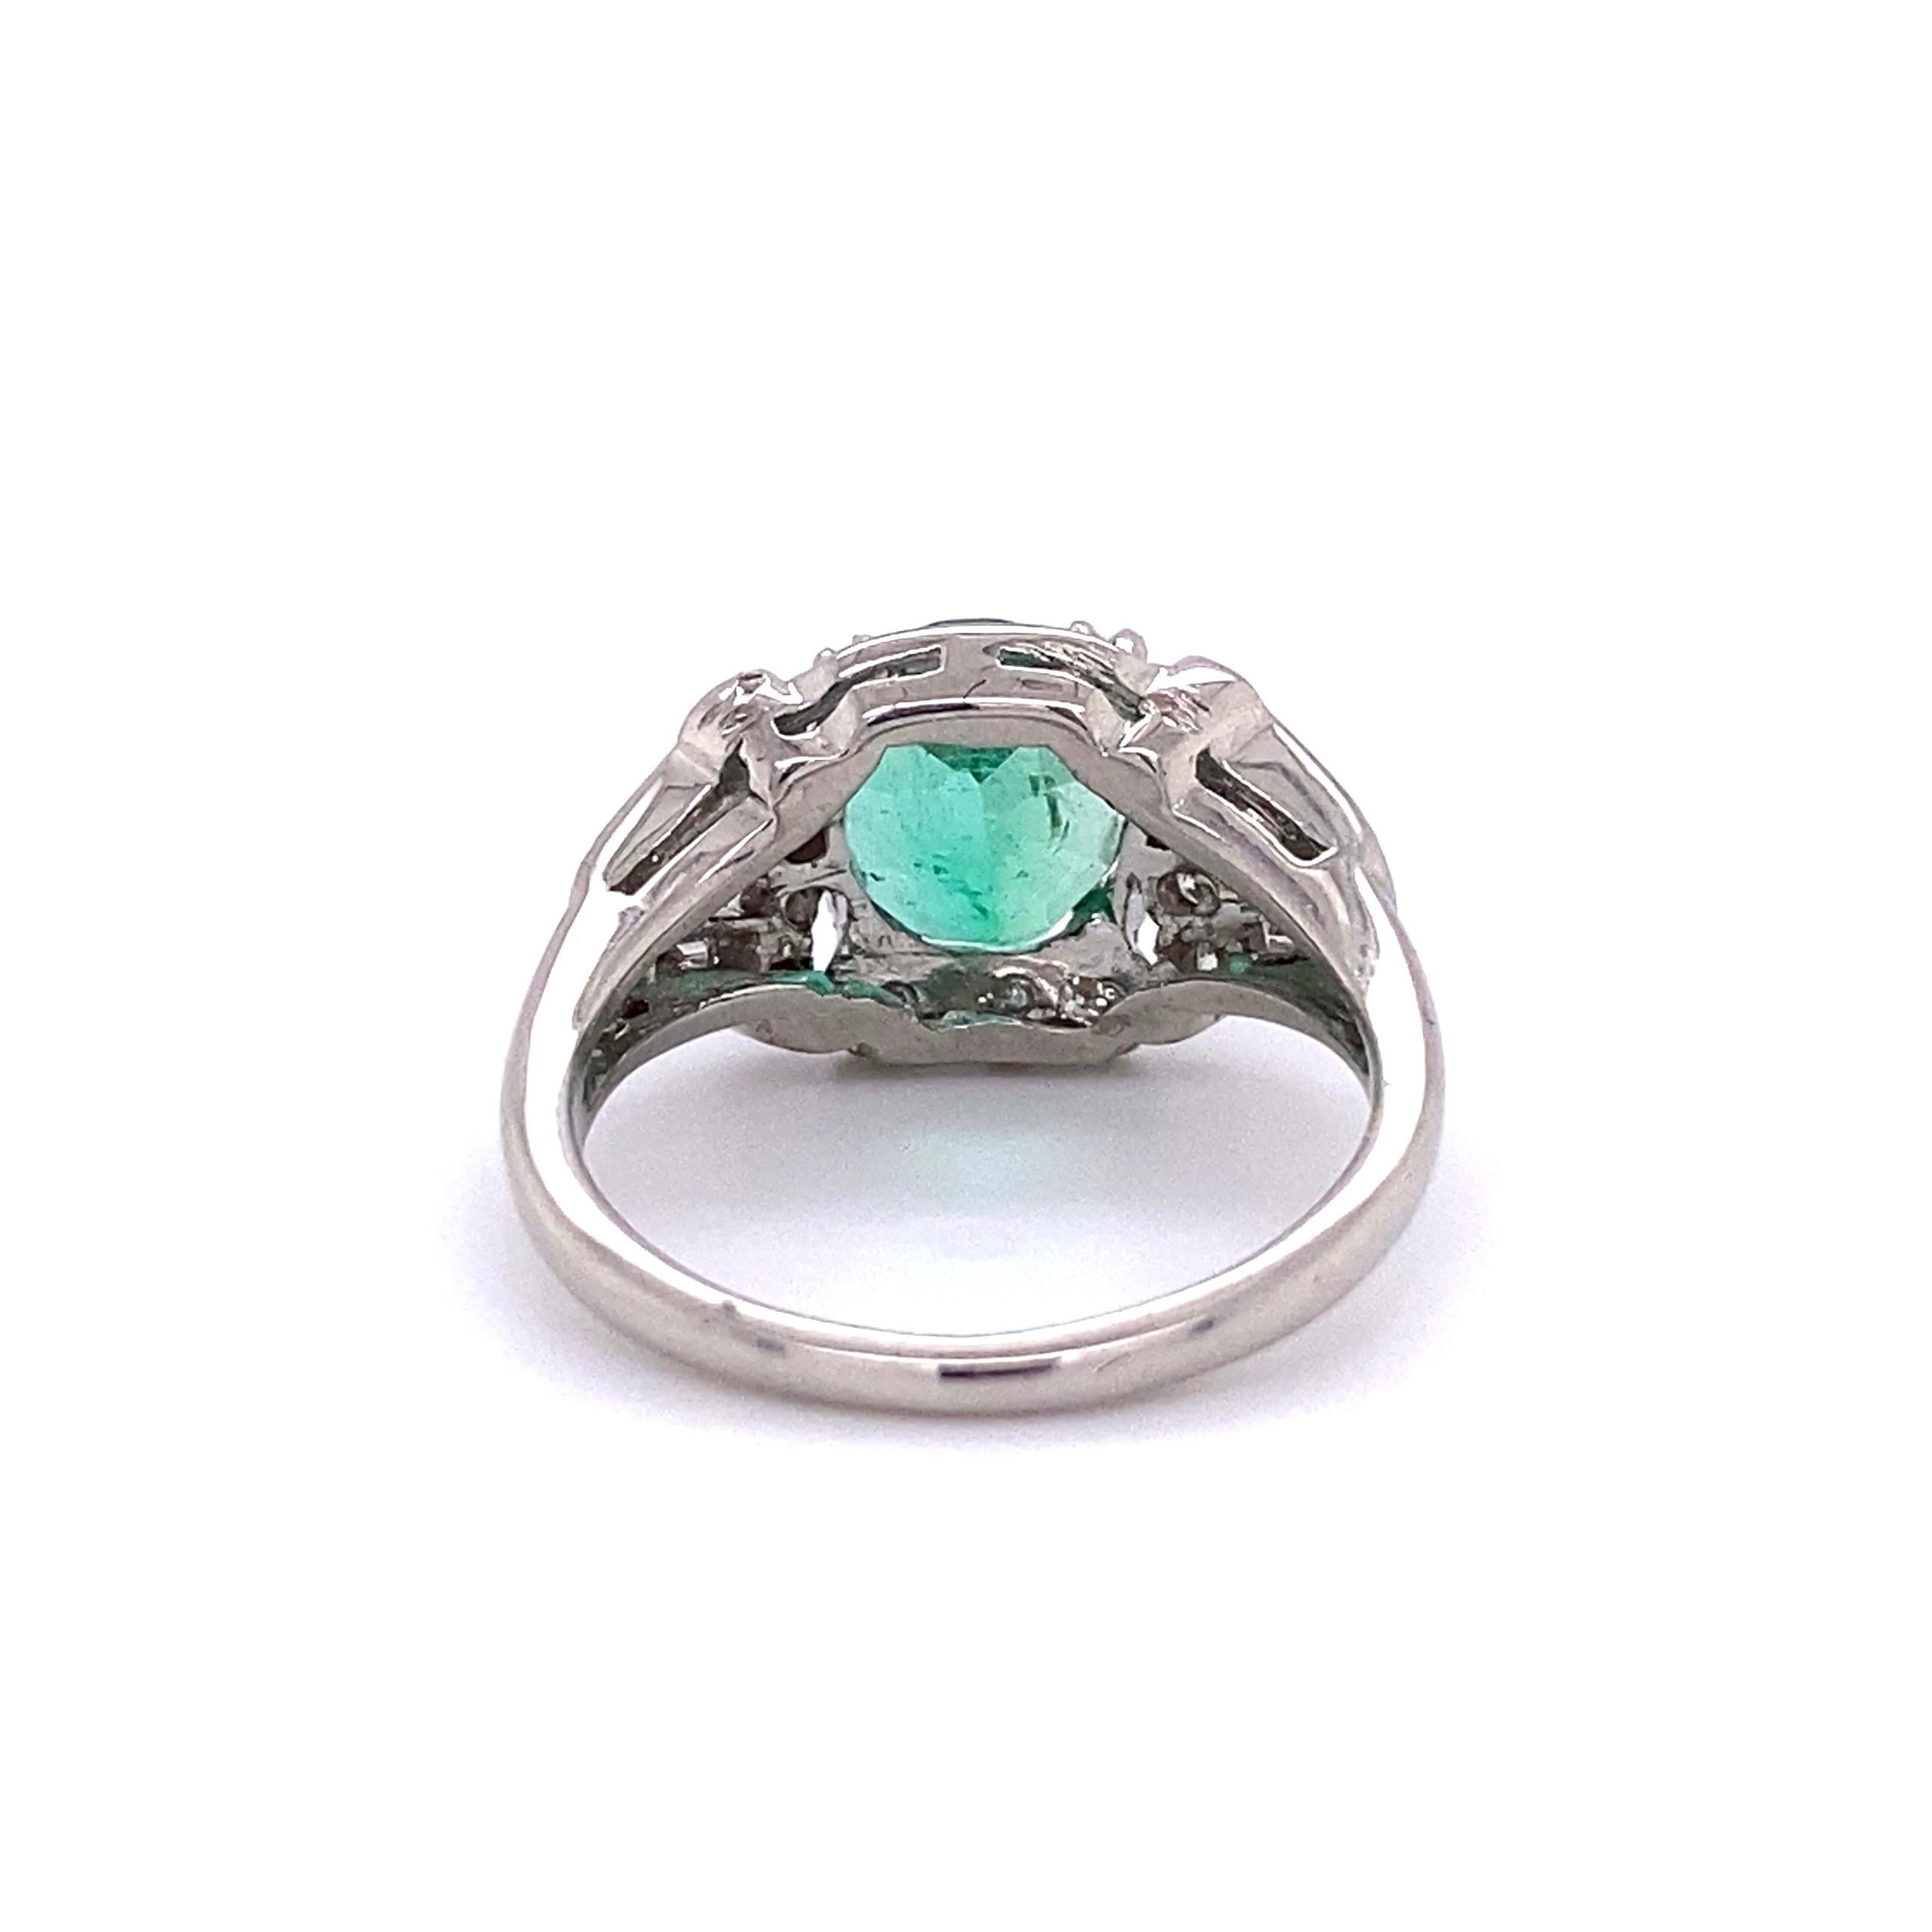 Mixed Cut 2.15 Carat Emerald and Diamond Platinum Cocktail Ring Estate Fine Jewelry For Sale